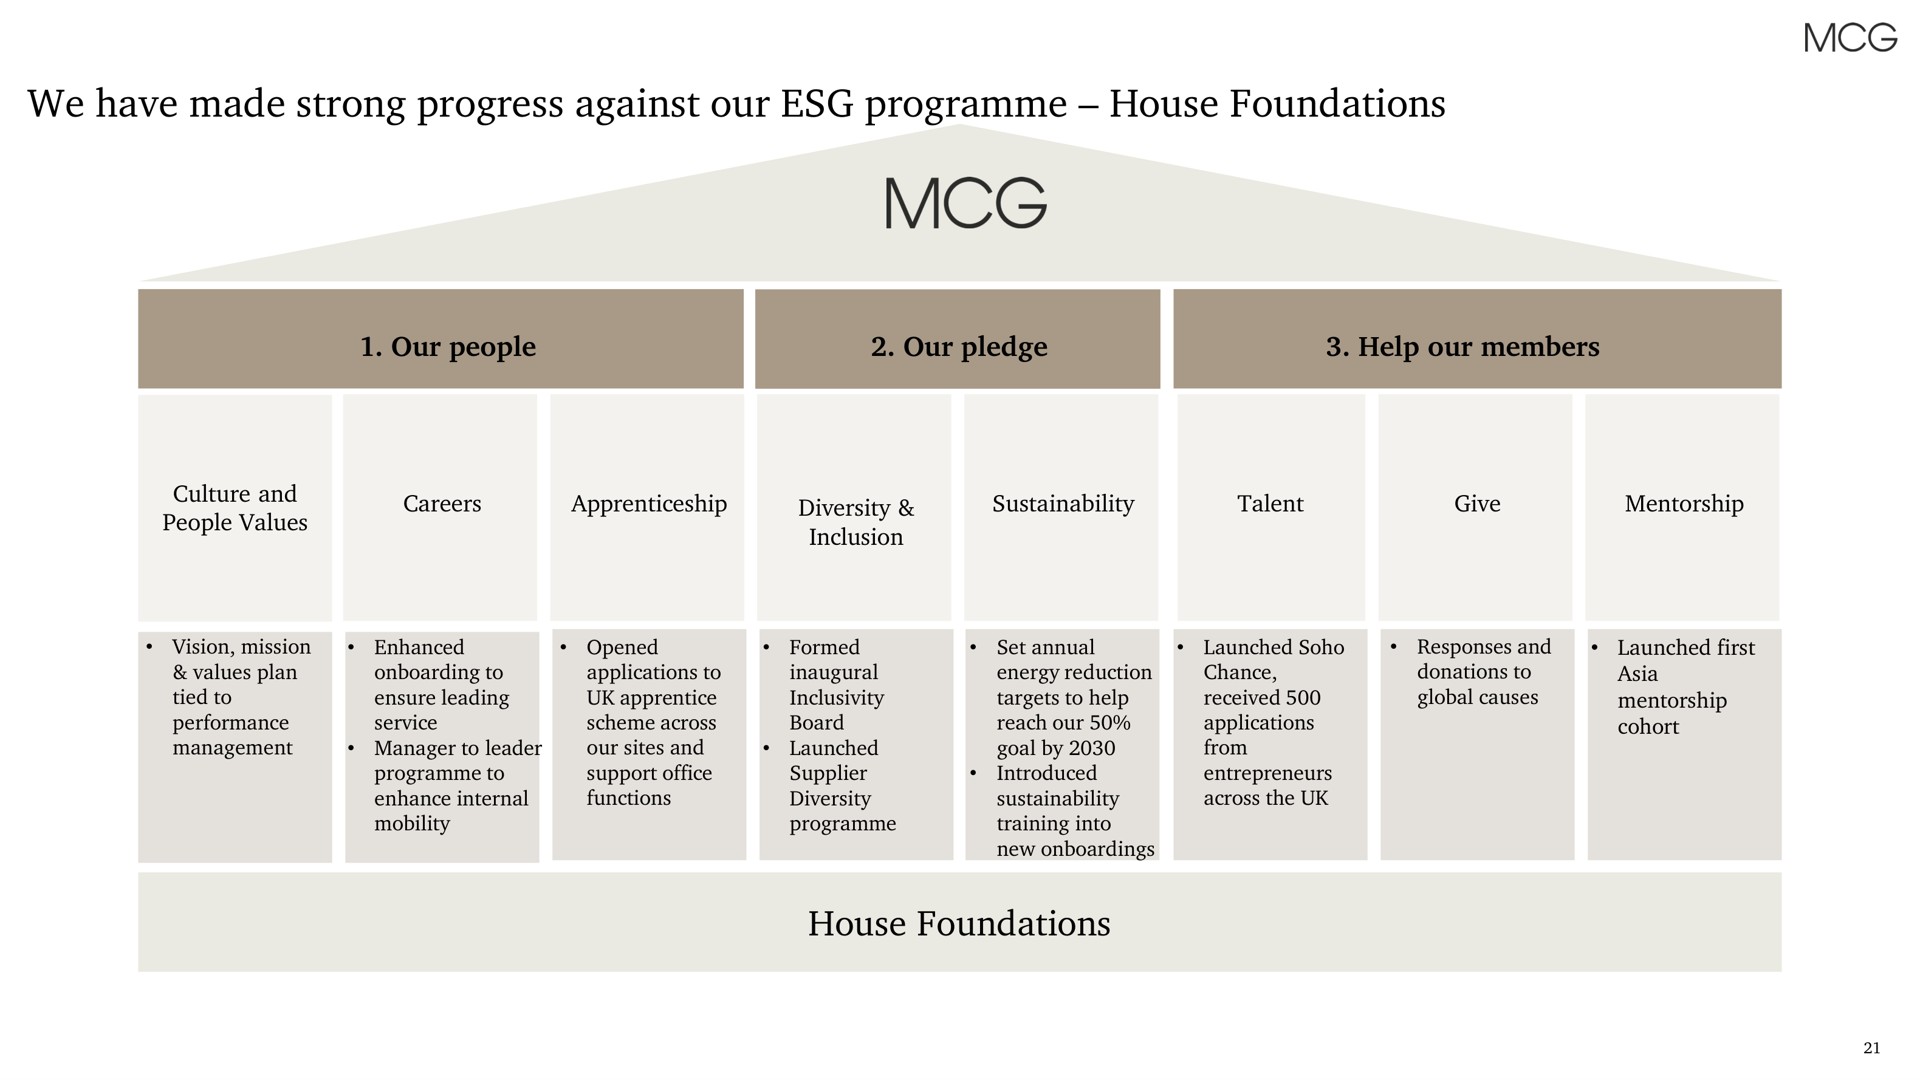 we have made strong progress against our house foundations house foundations | Membership Collective Group